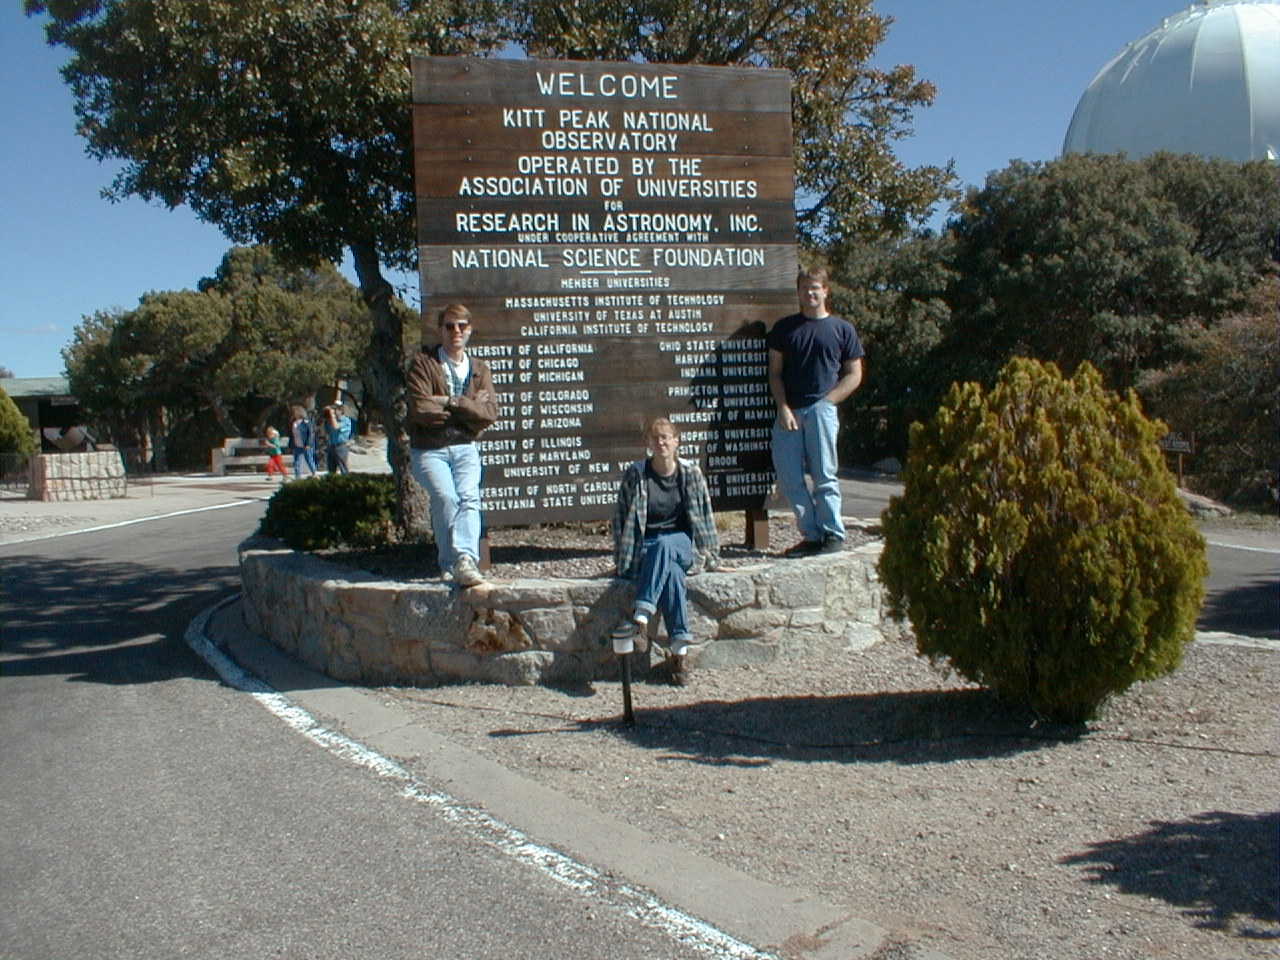 Jeff, Jaime, and Phil at the Welcome to Kitt Peak Sign